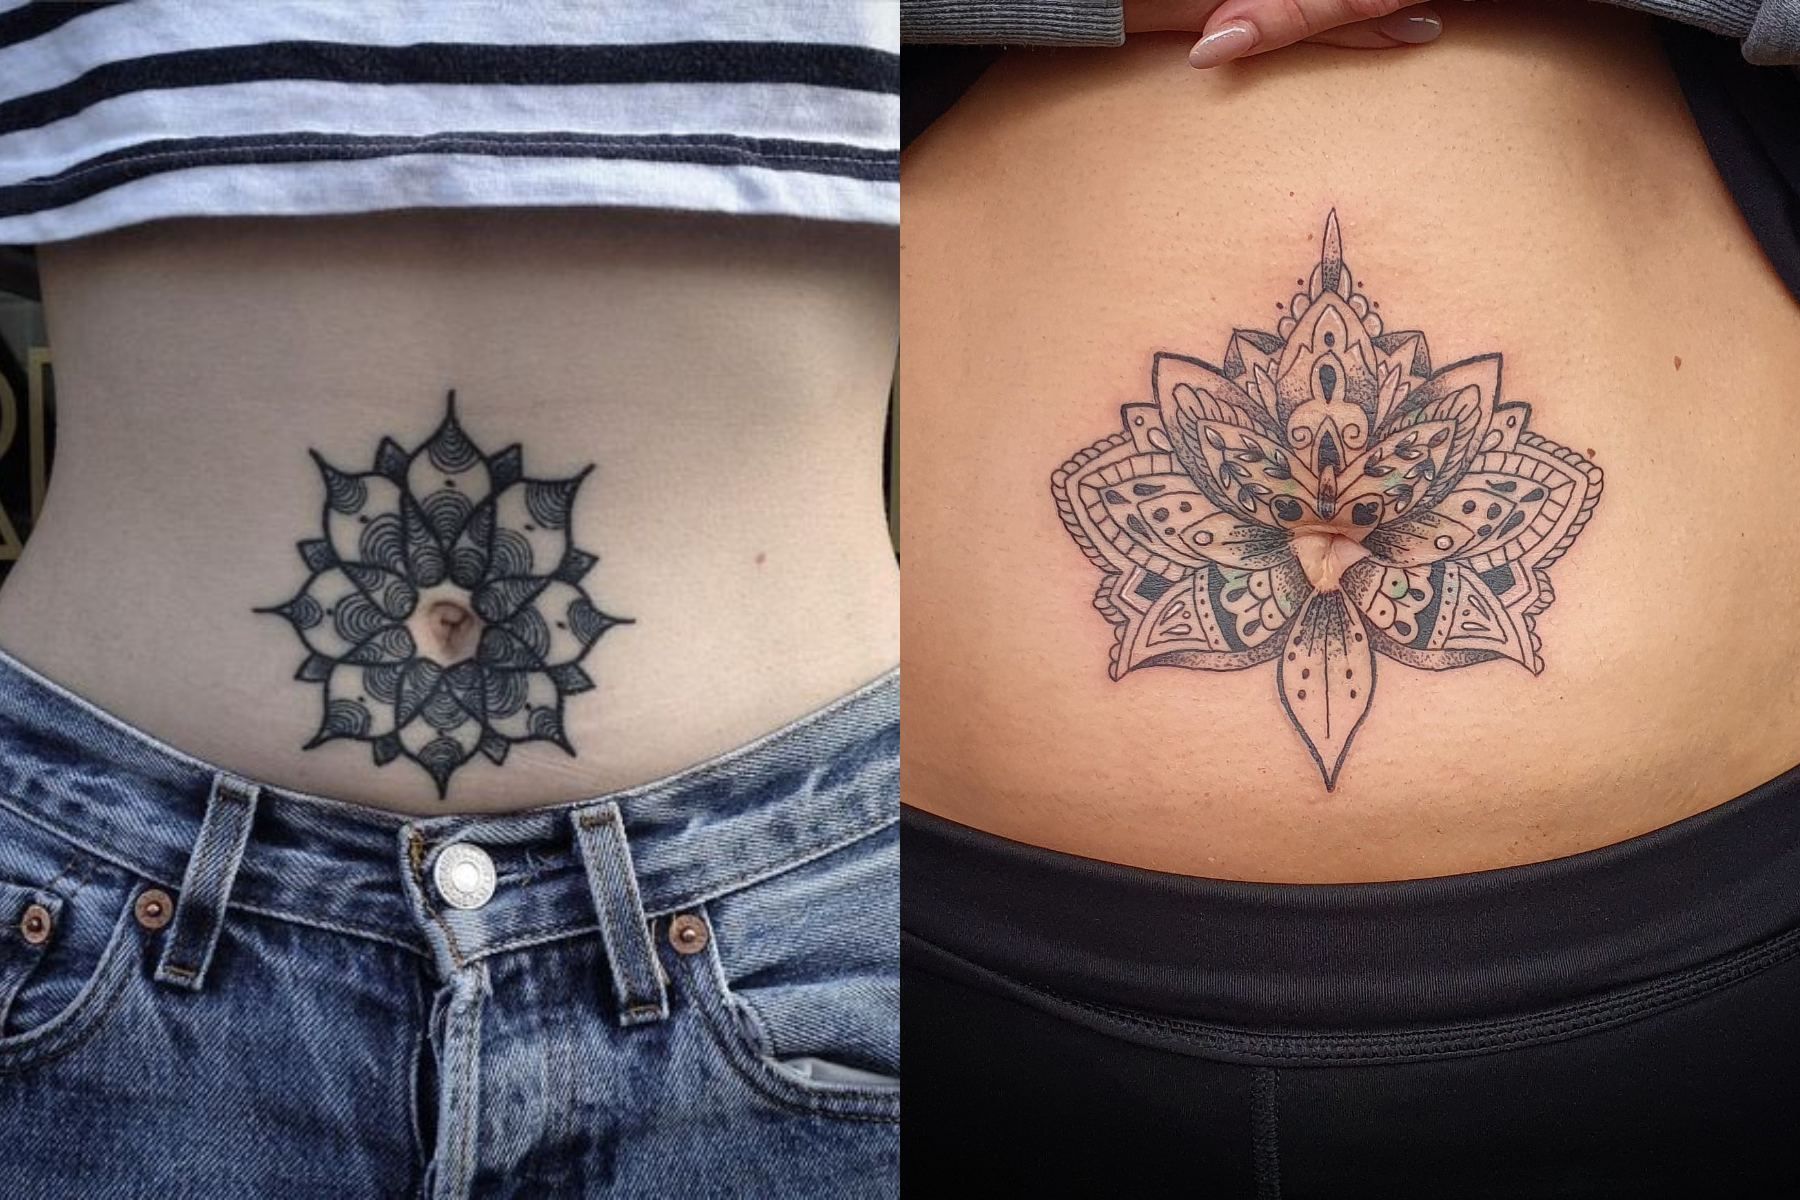 Where are some of the sexiest parts of a woman's body to put a tattoo? -  Quora